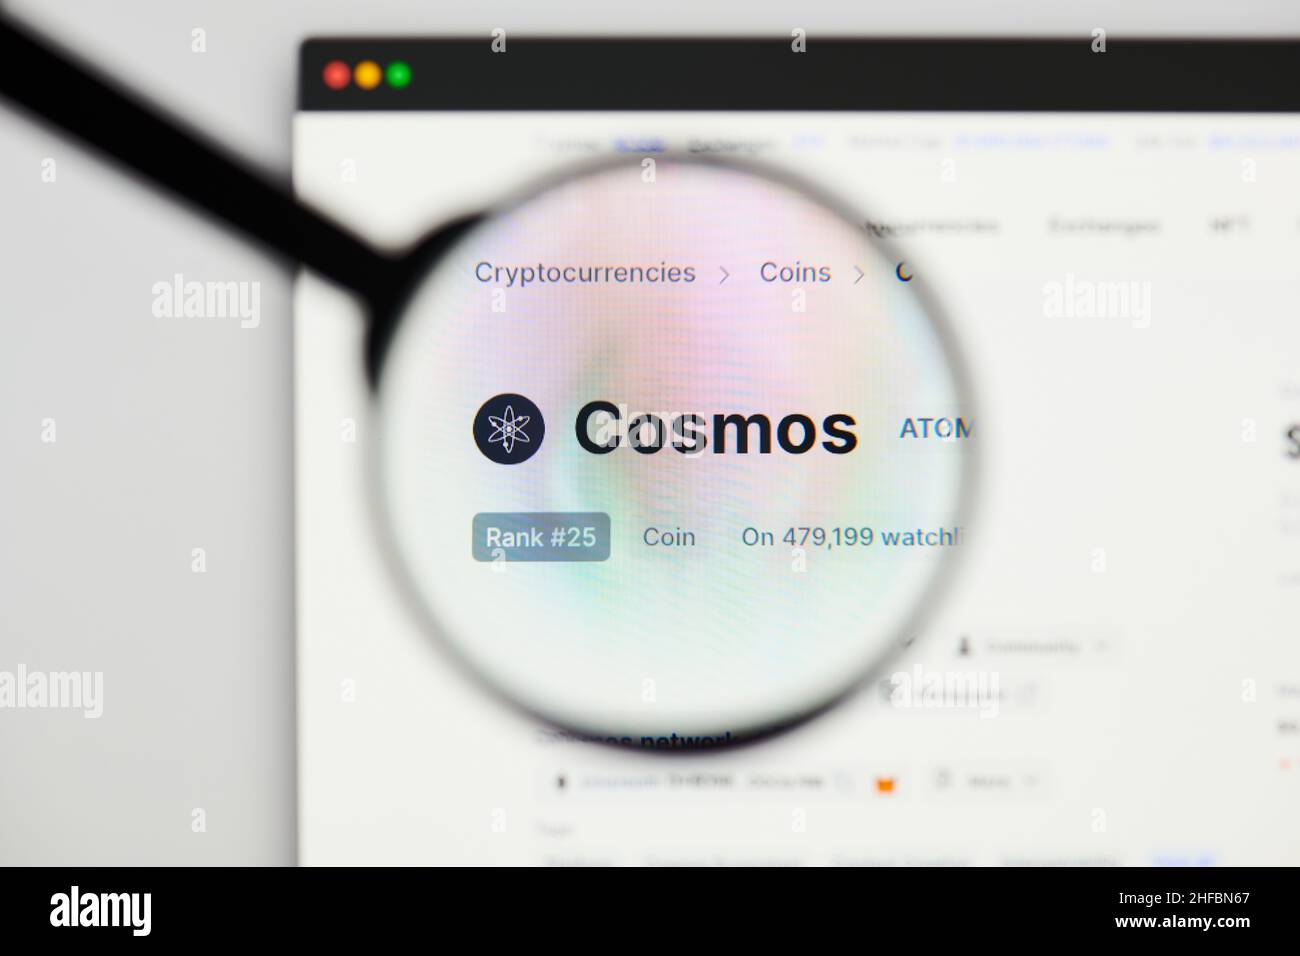 Milan, Italy - January 11, 2022: cosmos - ATOM website's hp.  cosmos, ATOM coin logo visible through a loope. Defi, ntf, cryptocurrency concepts illus Stock Photo